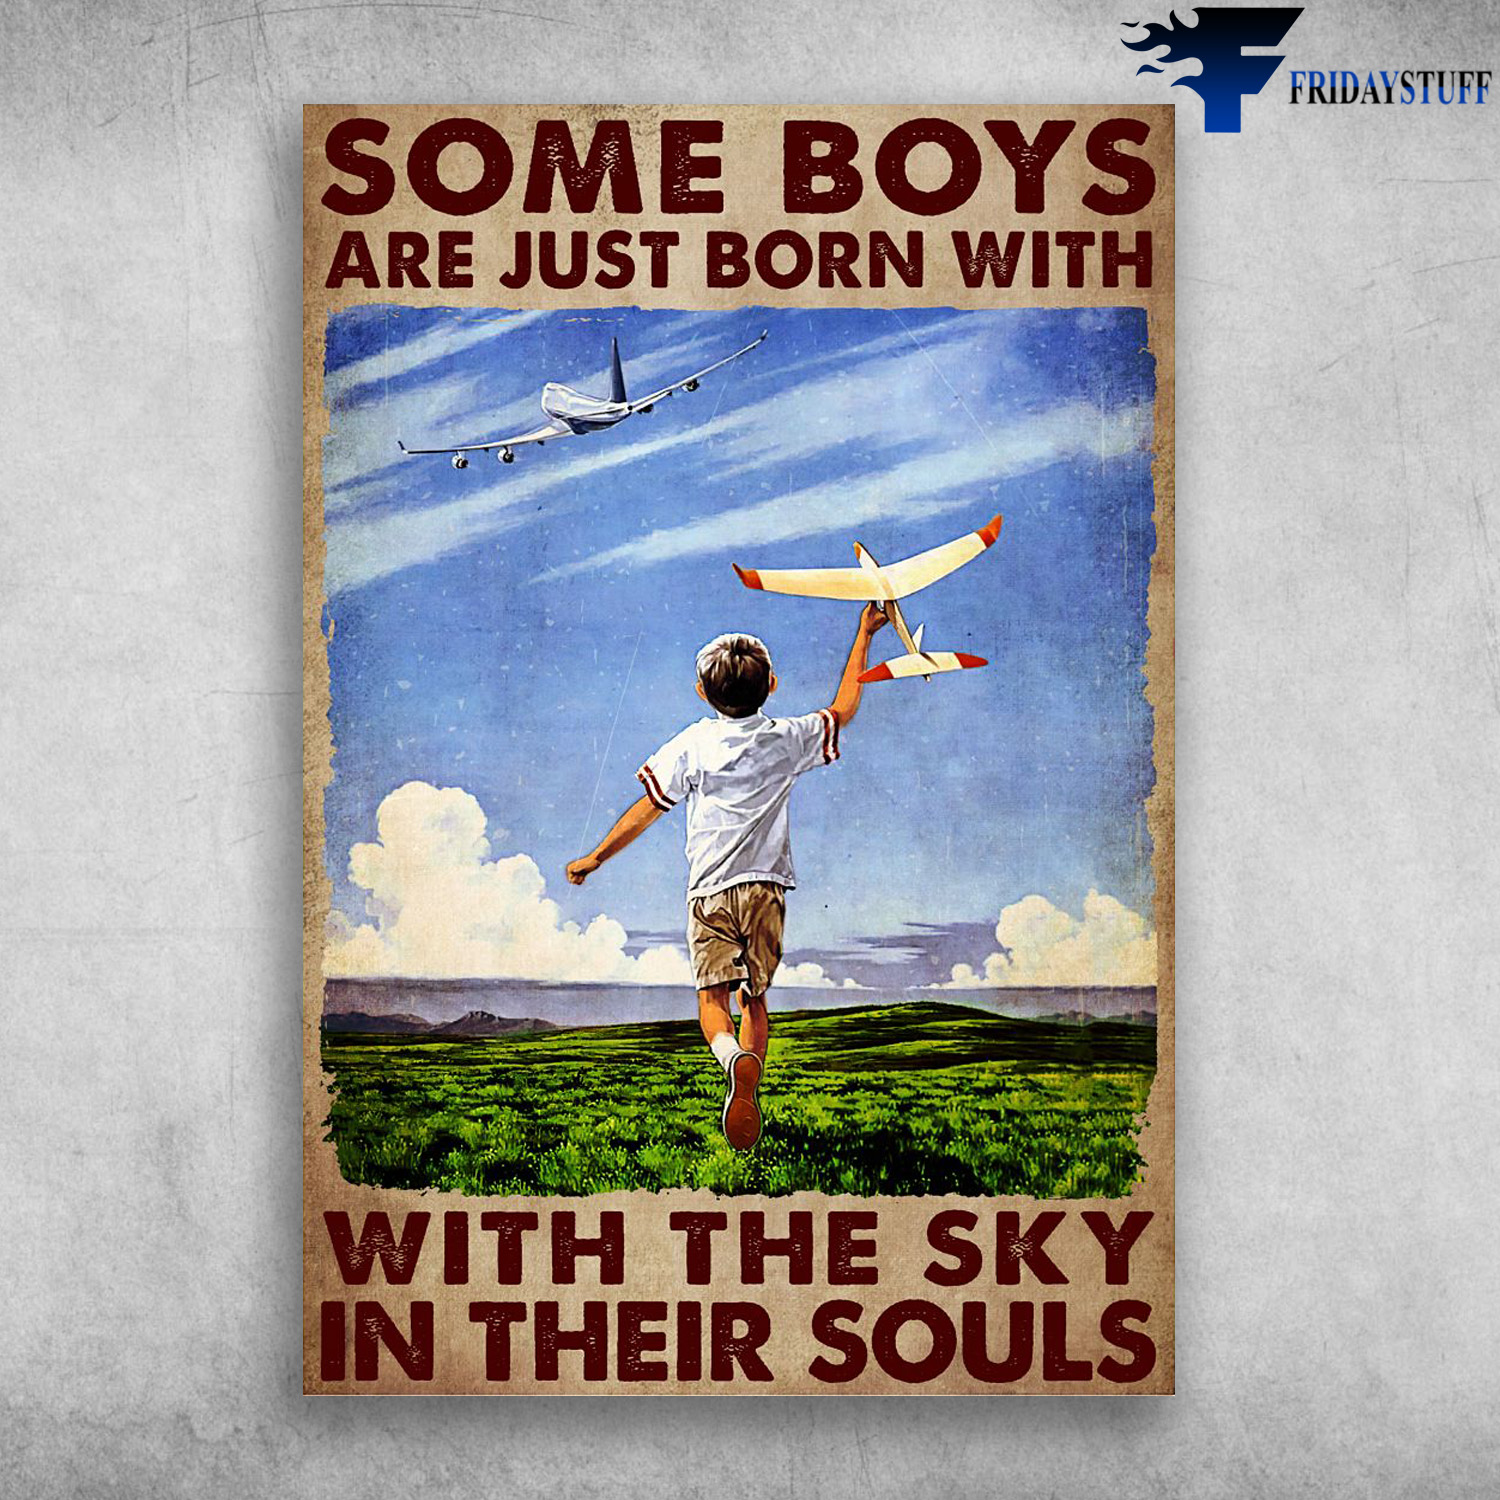 Boy And The Plane - Some Boys Are Just Born With, With The Sky, In Their Souls